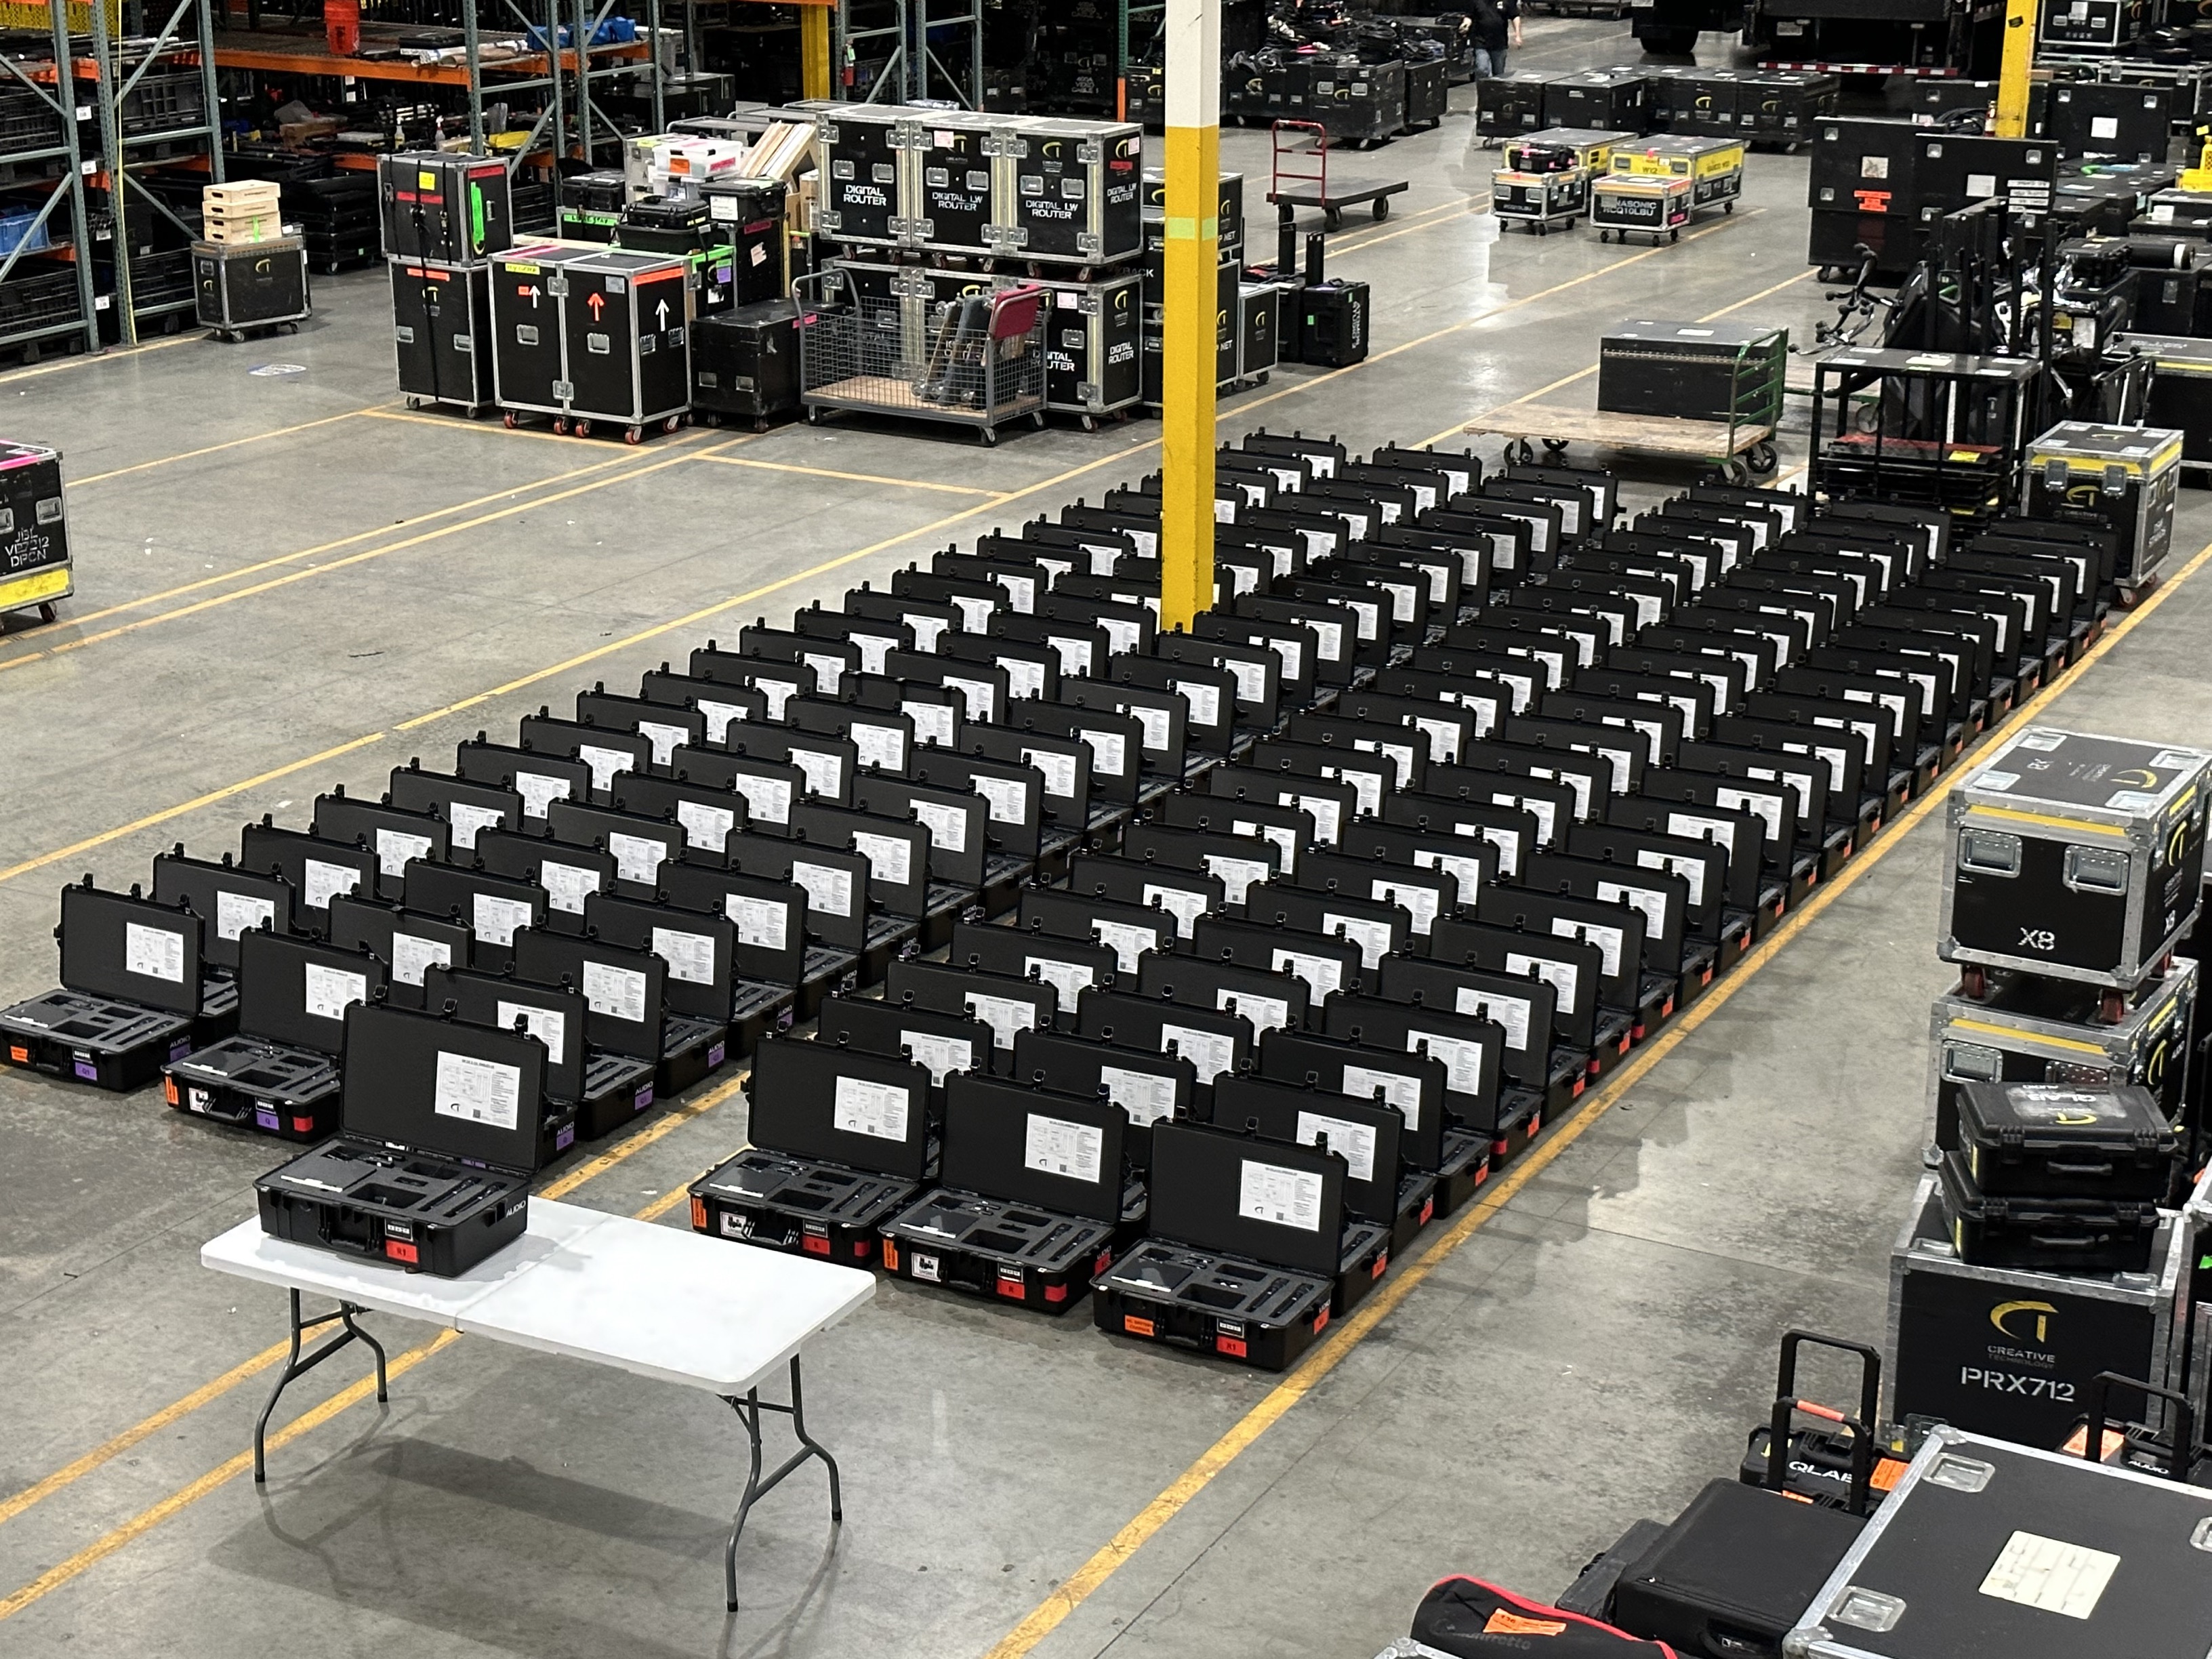 CTUS has assembled and deployed 140 custom wireless microphone kits  each with the Sennheiser EW-DX wireless system at its